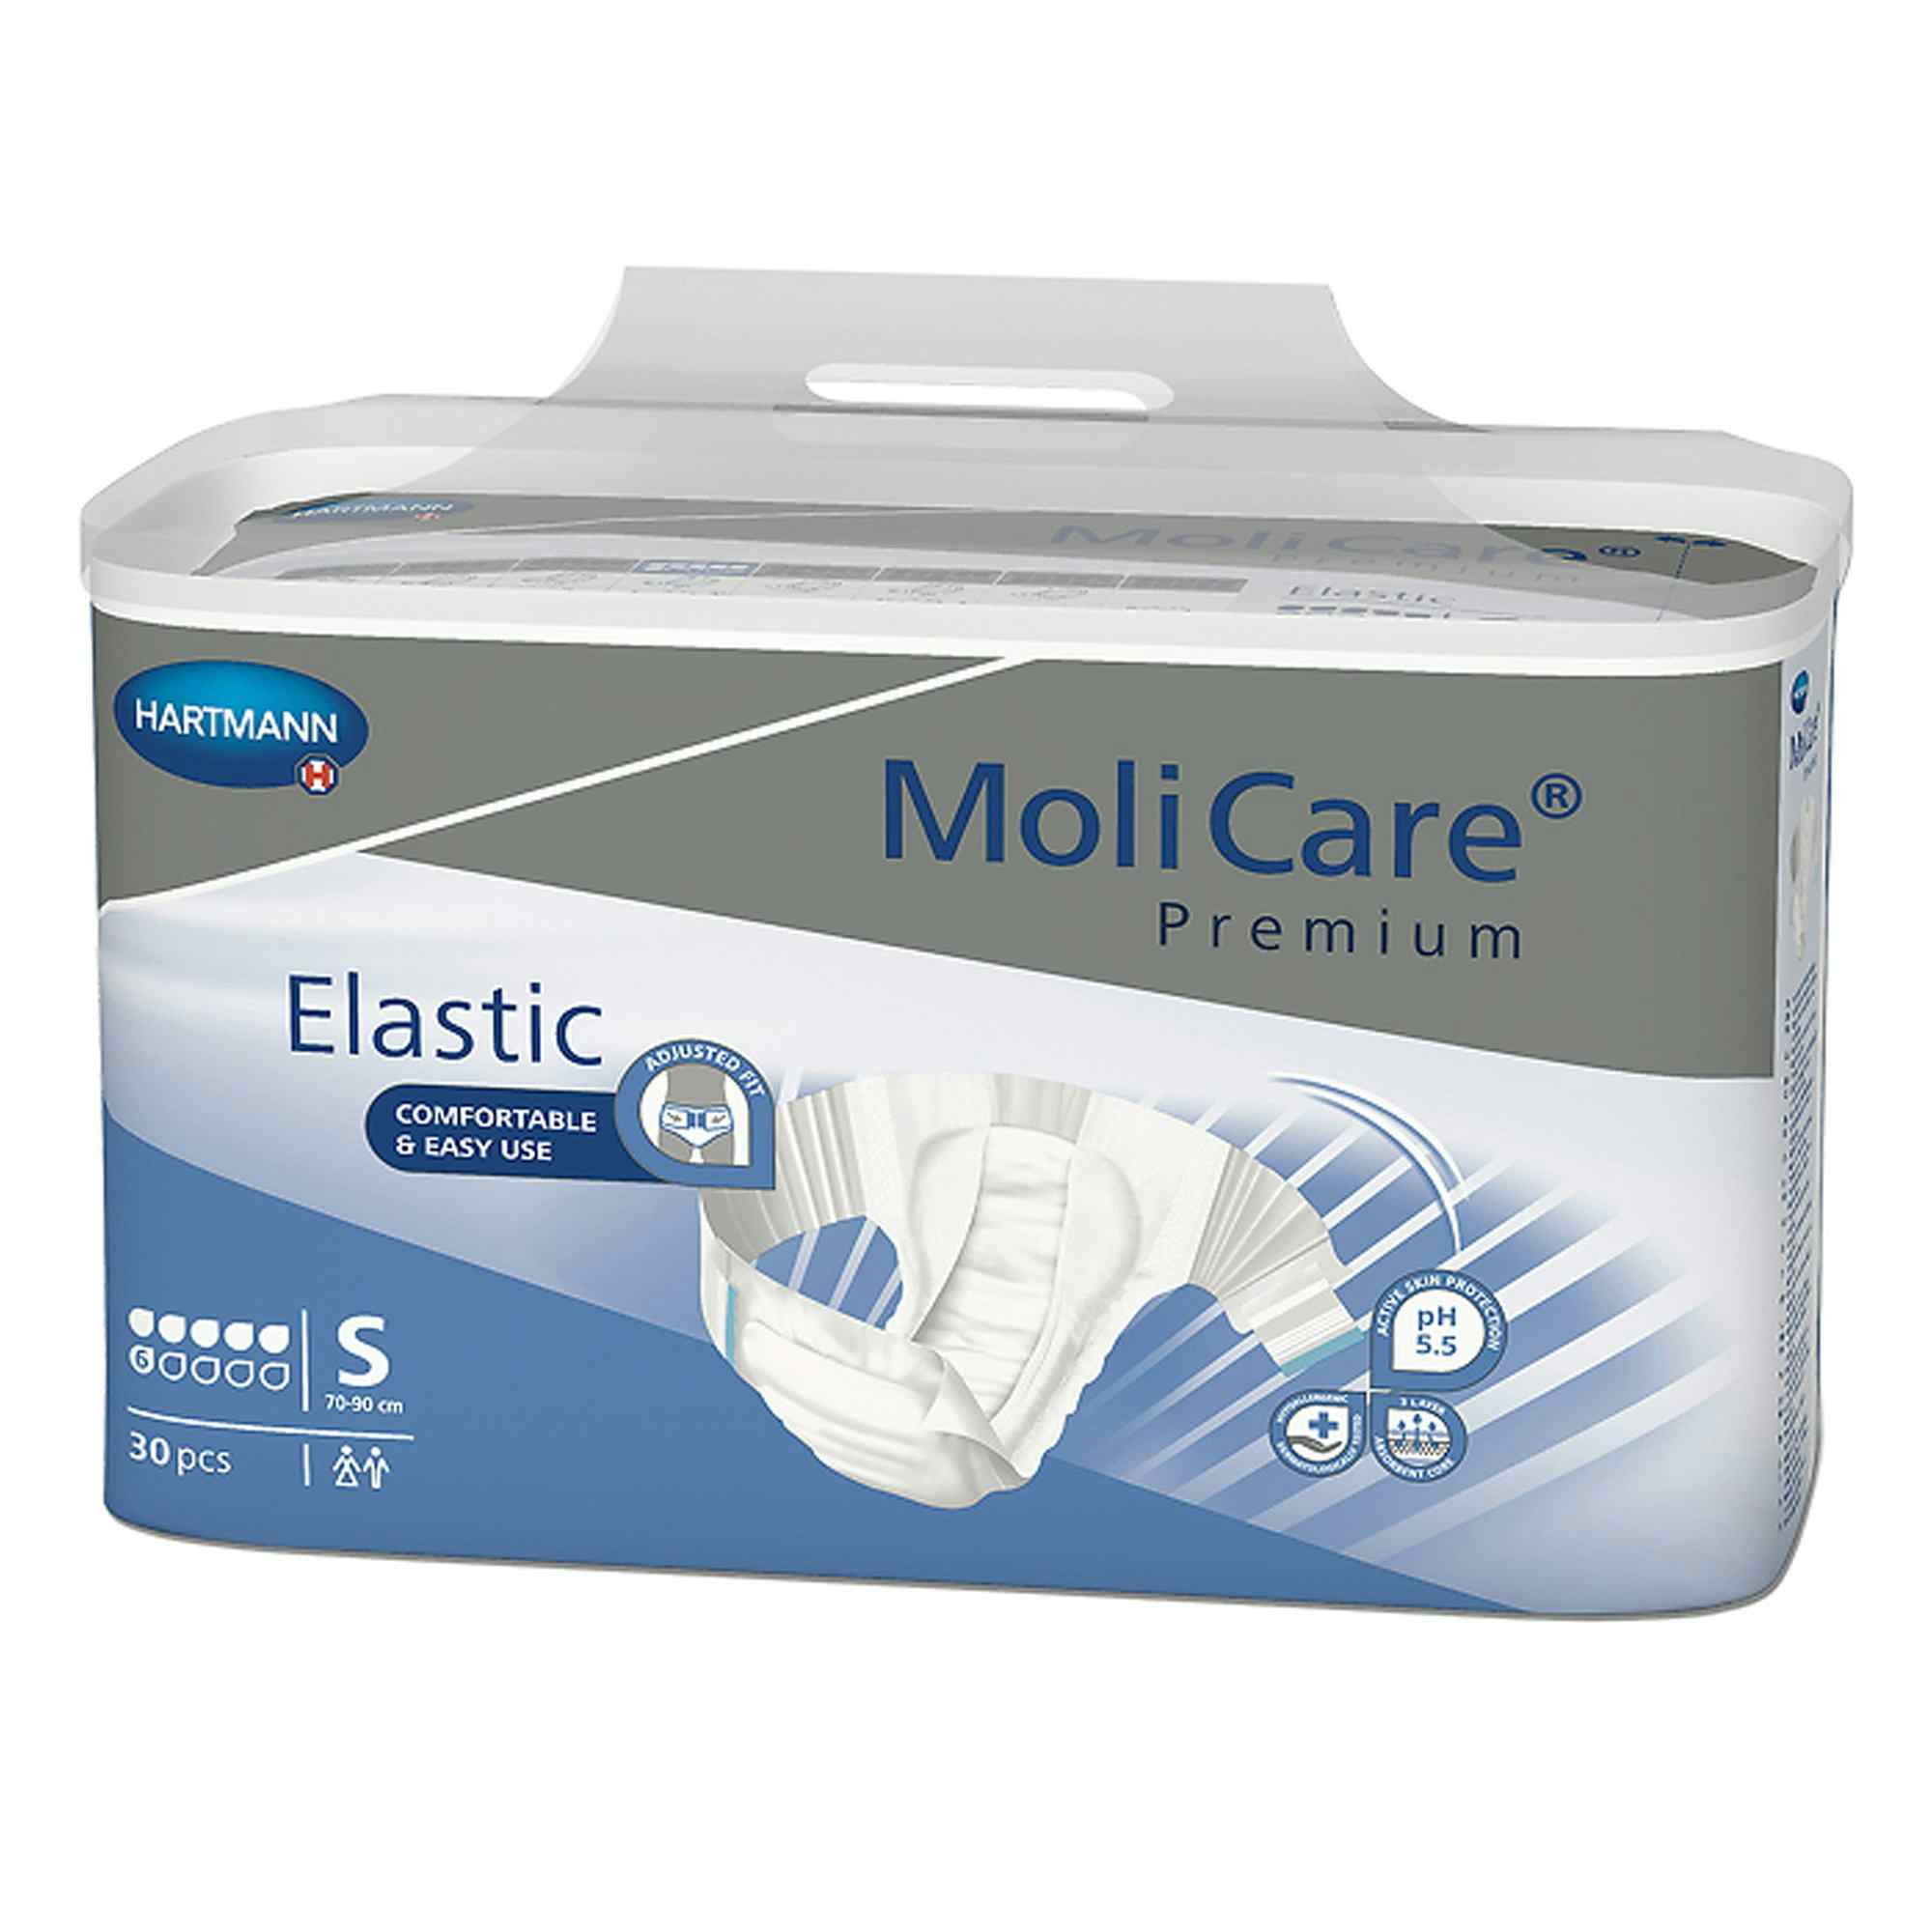 MoliCare Premium Elastic 6D Disposable Brief Adult Diapers with Tabs, Moderate Absorbency